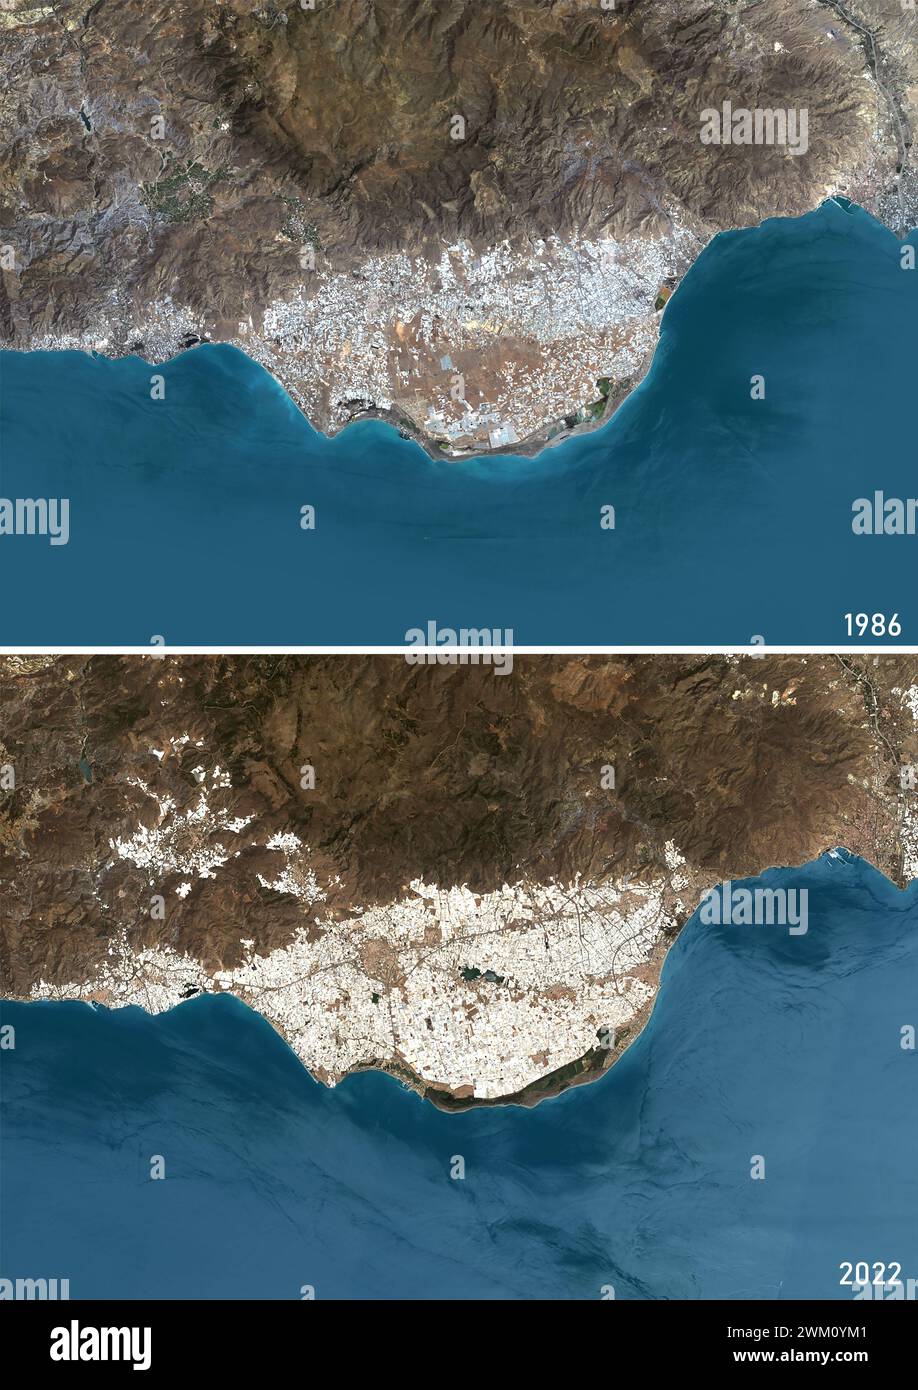 Color satellite image of intensive farming in Almeria, Spain between 1986 and 2022. The images show how the "plastic sea" formed by greenhouses has expanded. Stock Photo